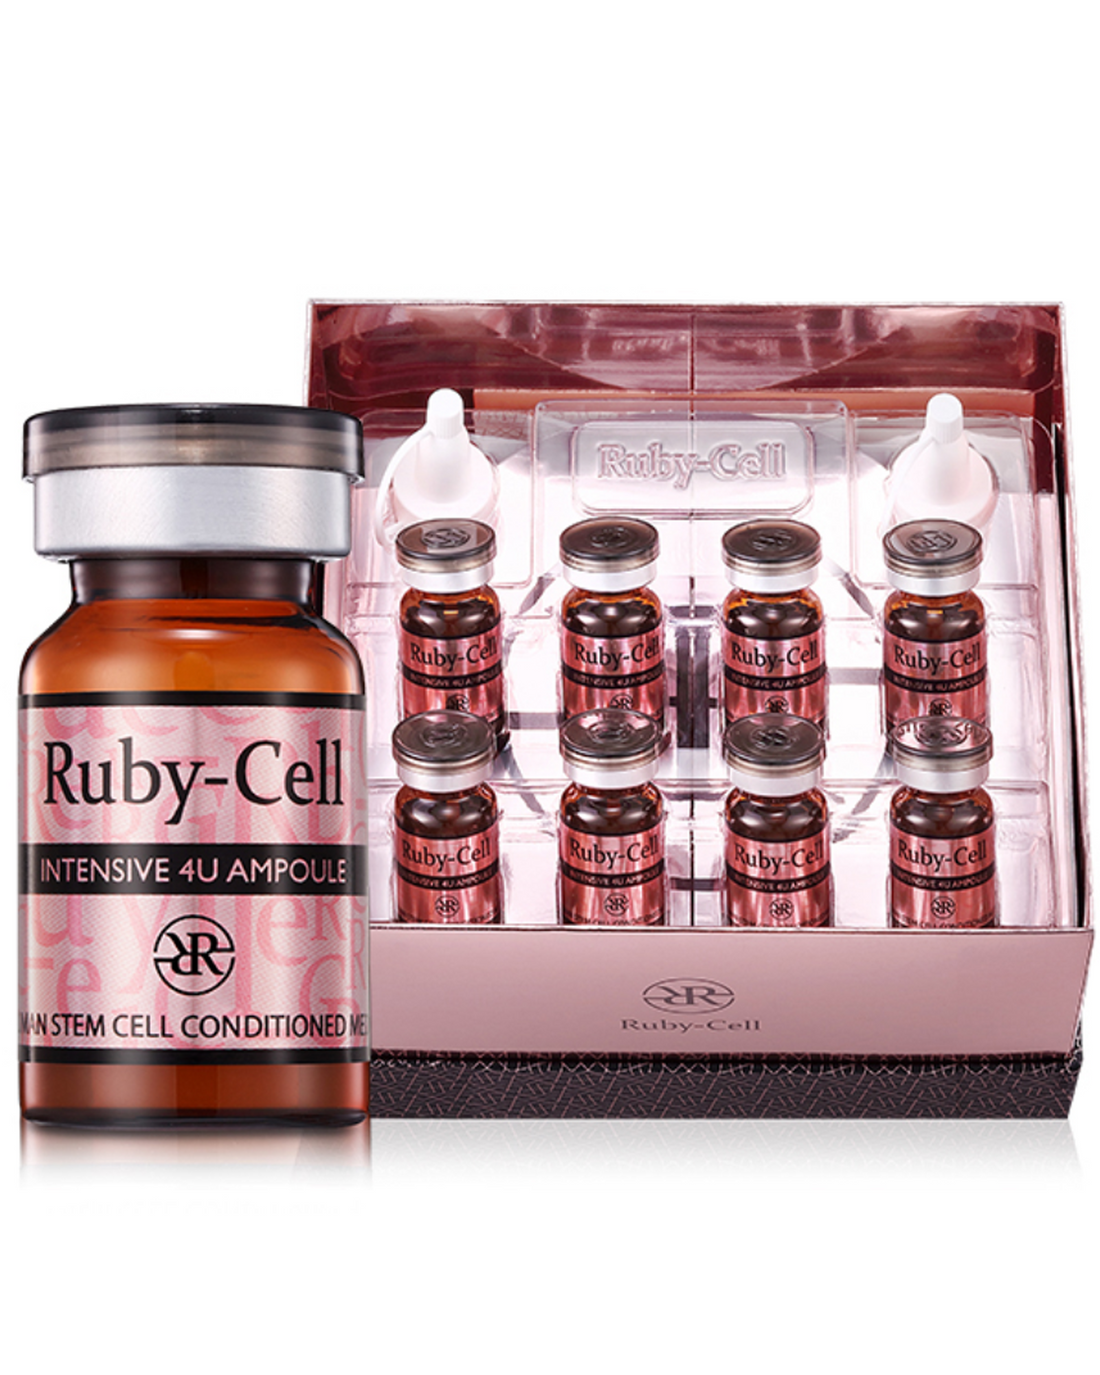 Ruby-Cell Intensive 4U Ampulle